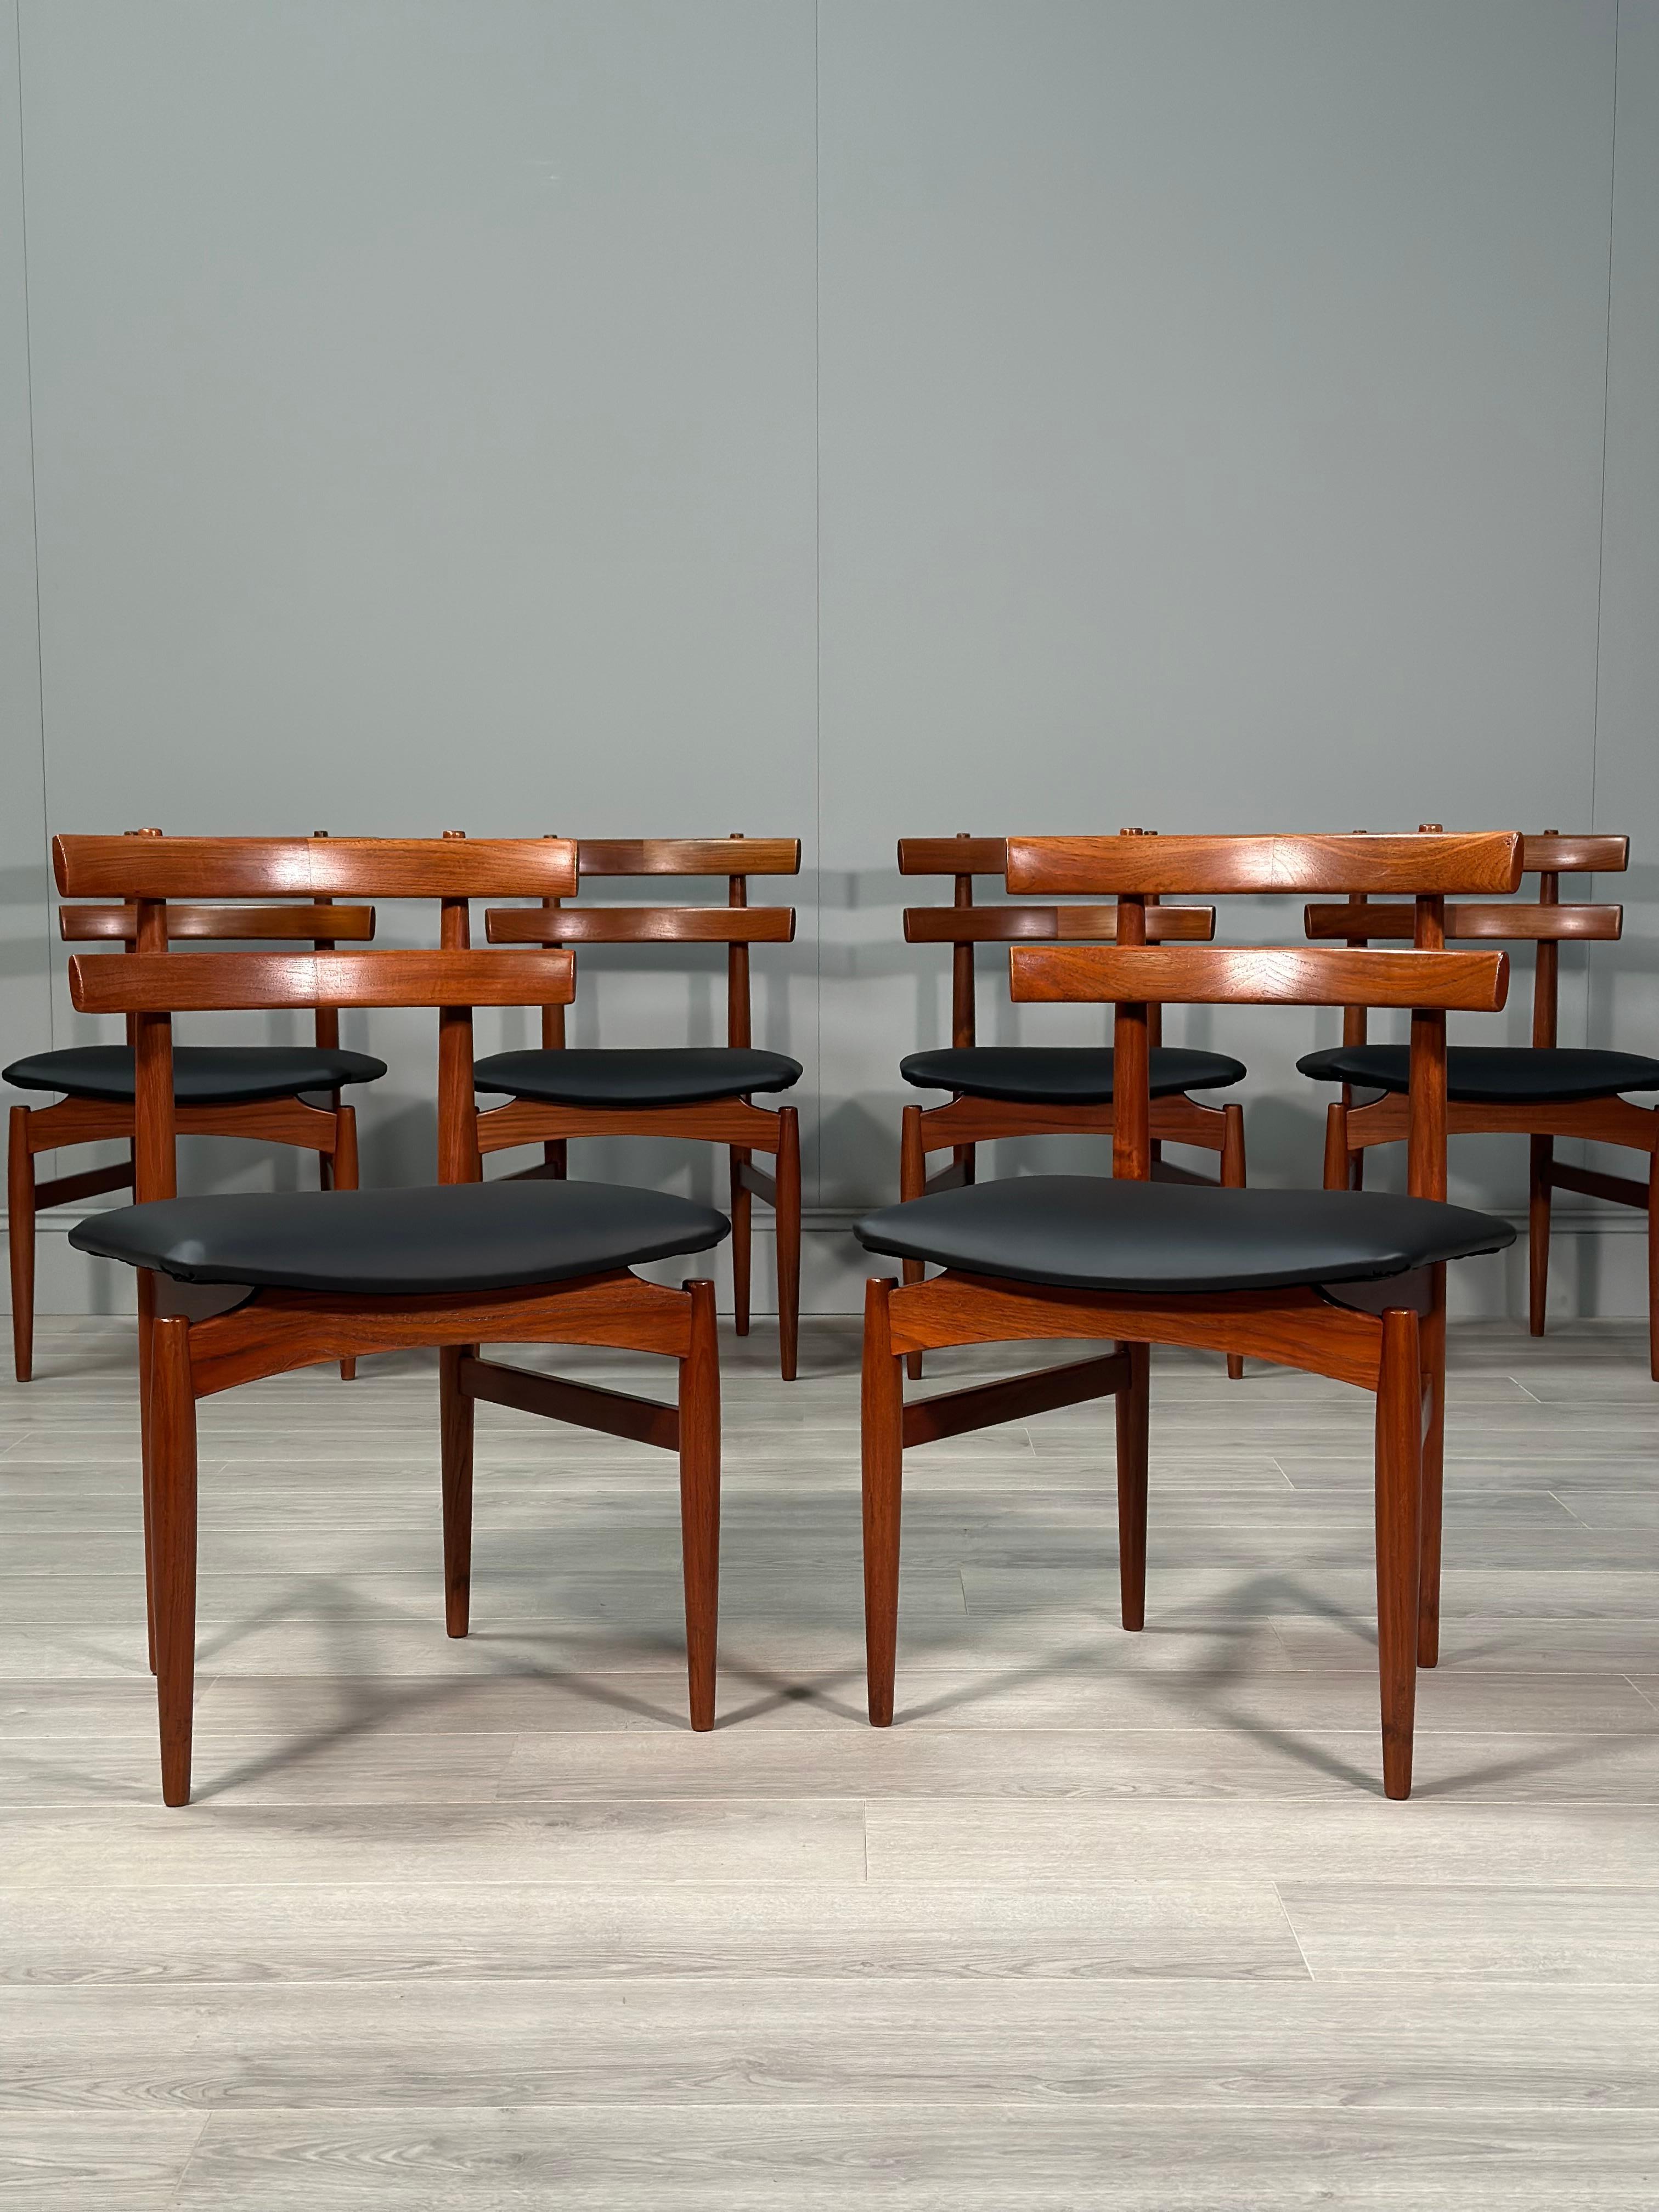 A rarely seen set of 6 teak dining chairs designed and produced by Poul Hundevad, Denmark. The chairs have a stylish curved back which has a split contrast in grain with a floating seat freshly reupholstered in black vinyl. A quality set of 6 in